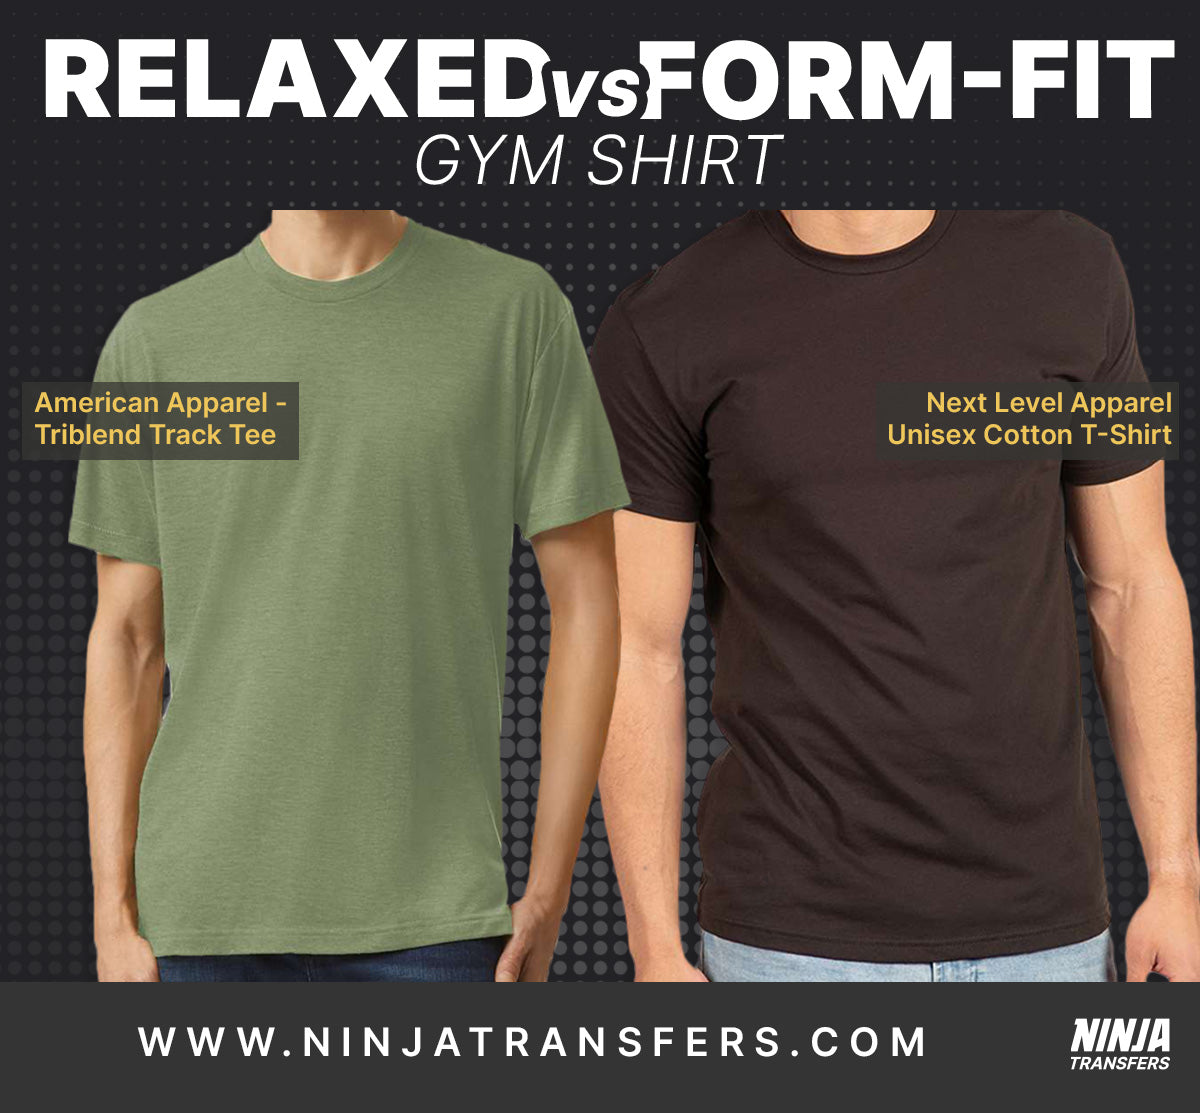 Photo of two models: One wearing a form-fitting performance gym shirt, the other wearing a relaxed fit cotton gym shirt